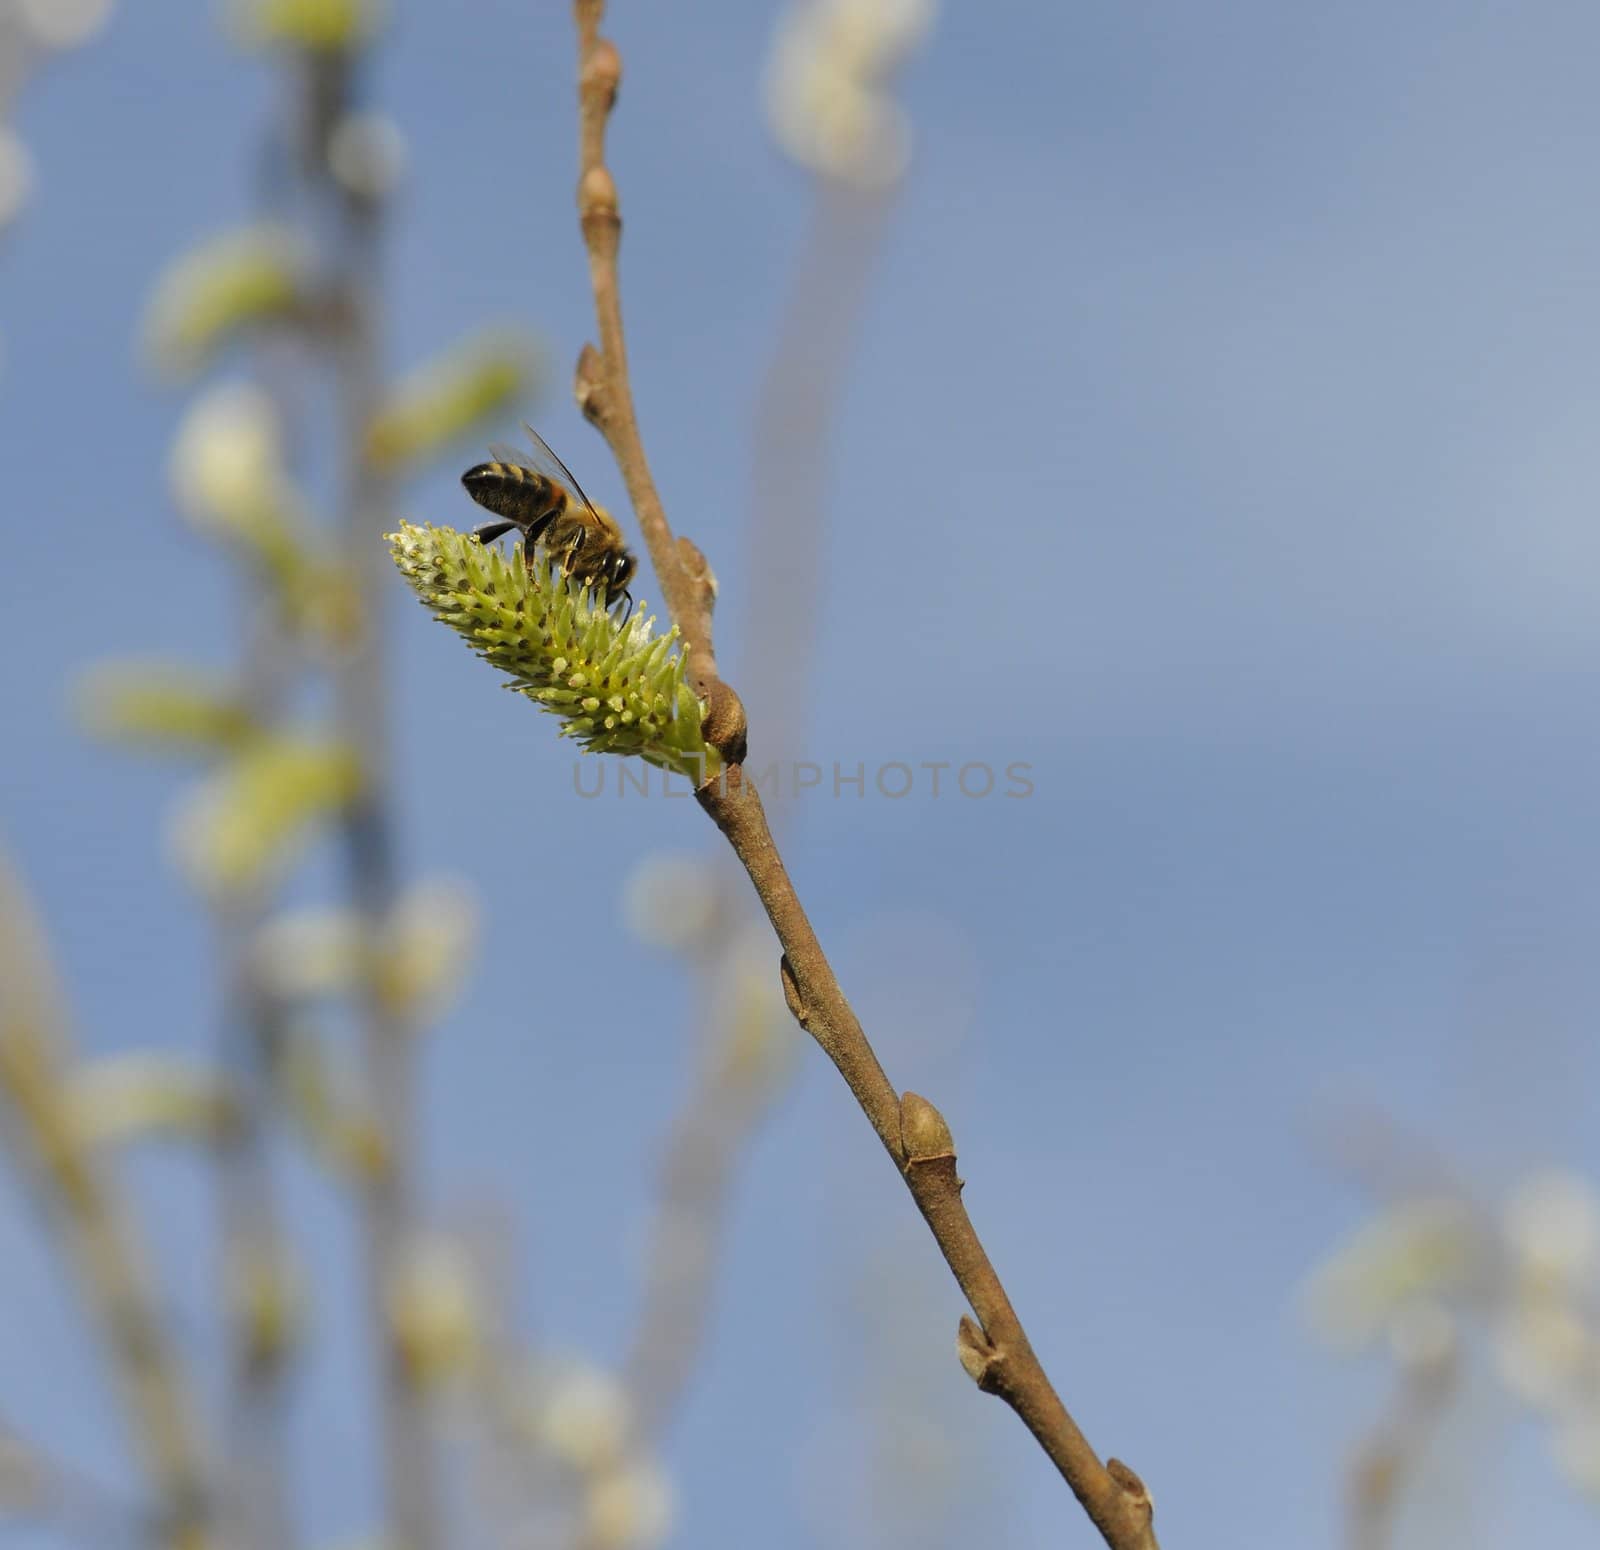 A bee above a green bud with a blurred blue sky